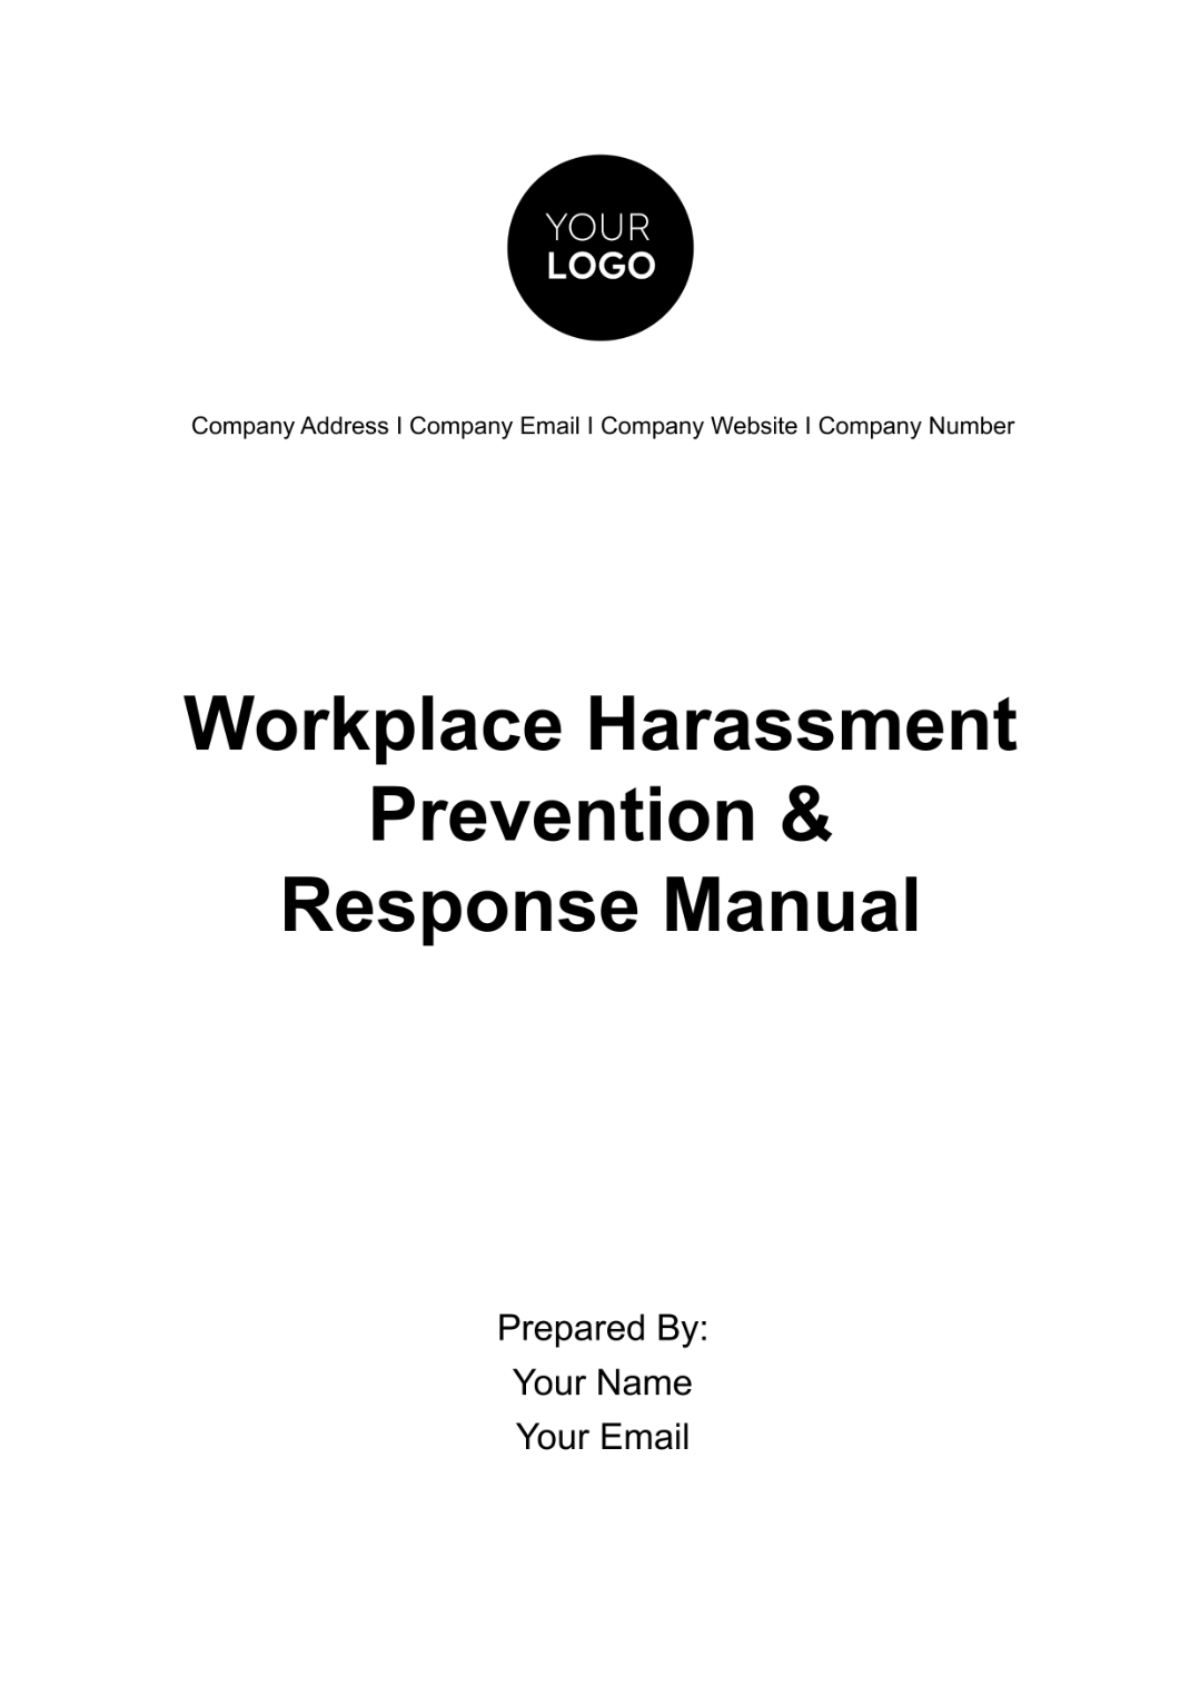 Workplace Harassment Prevention & Response Manual HR Template